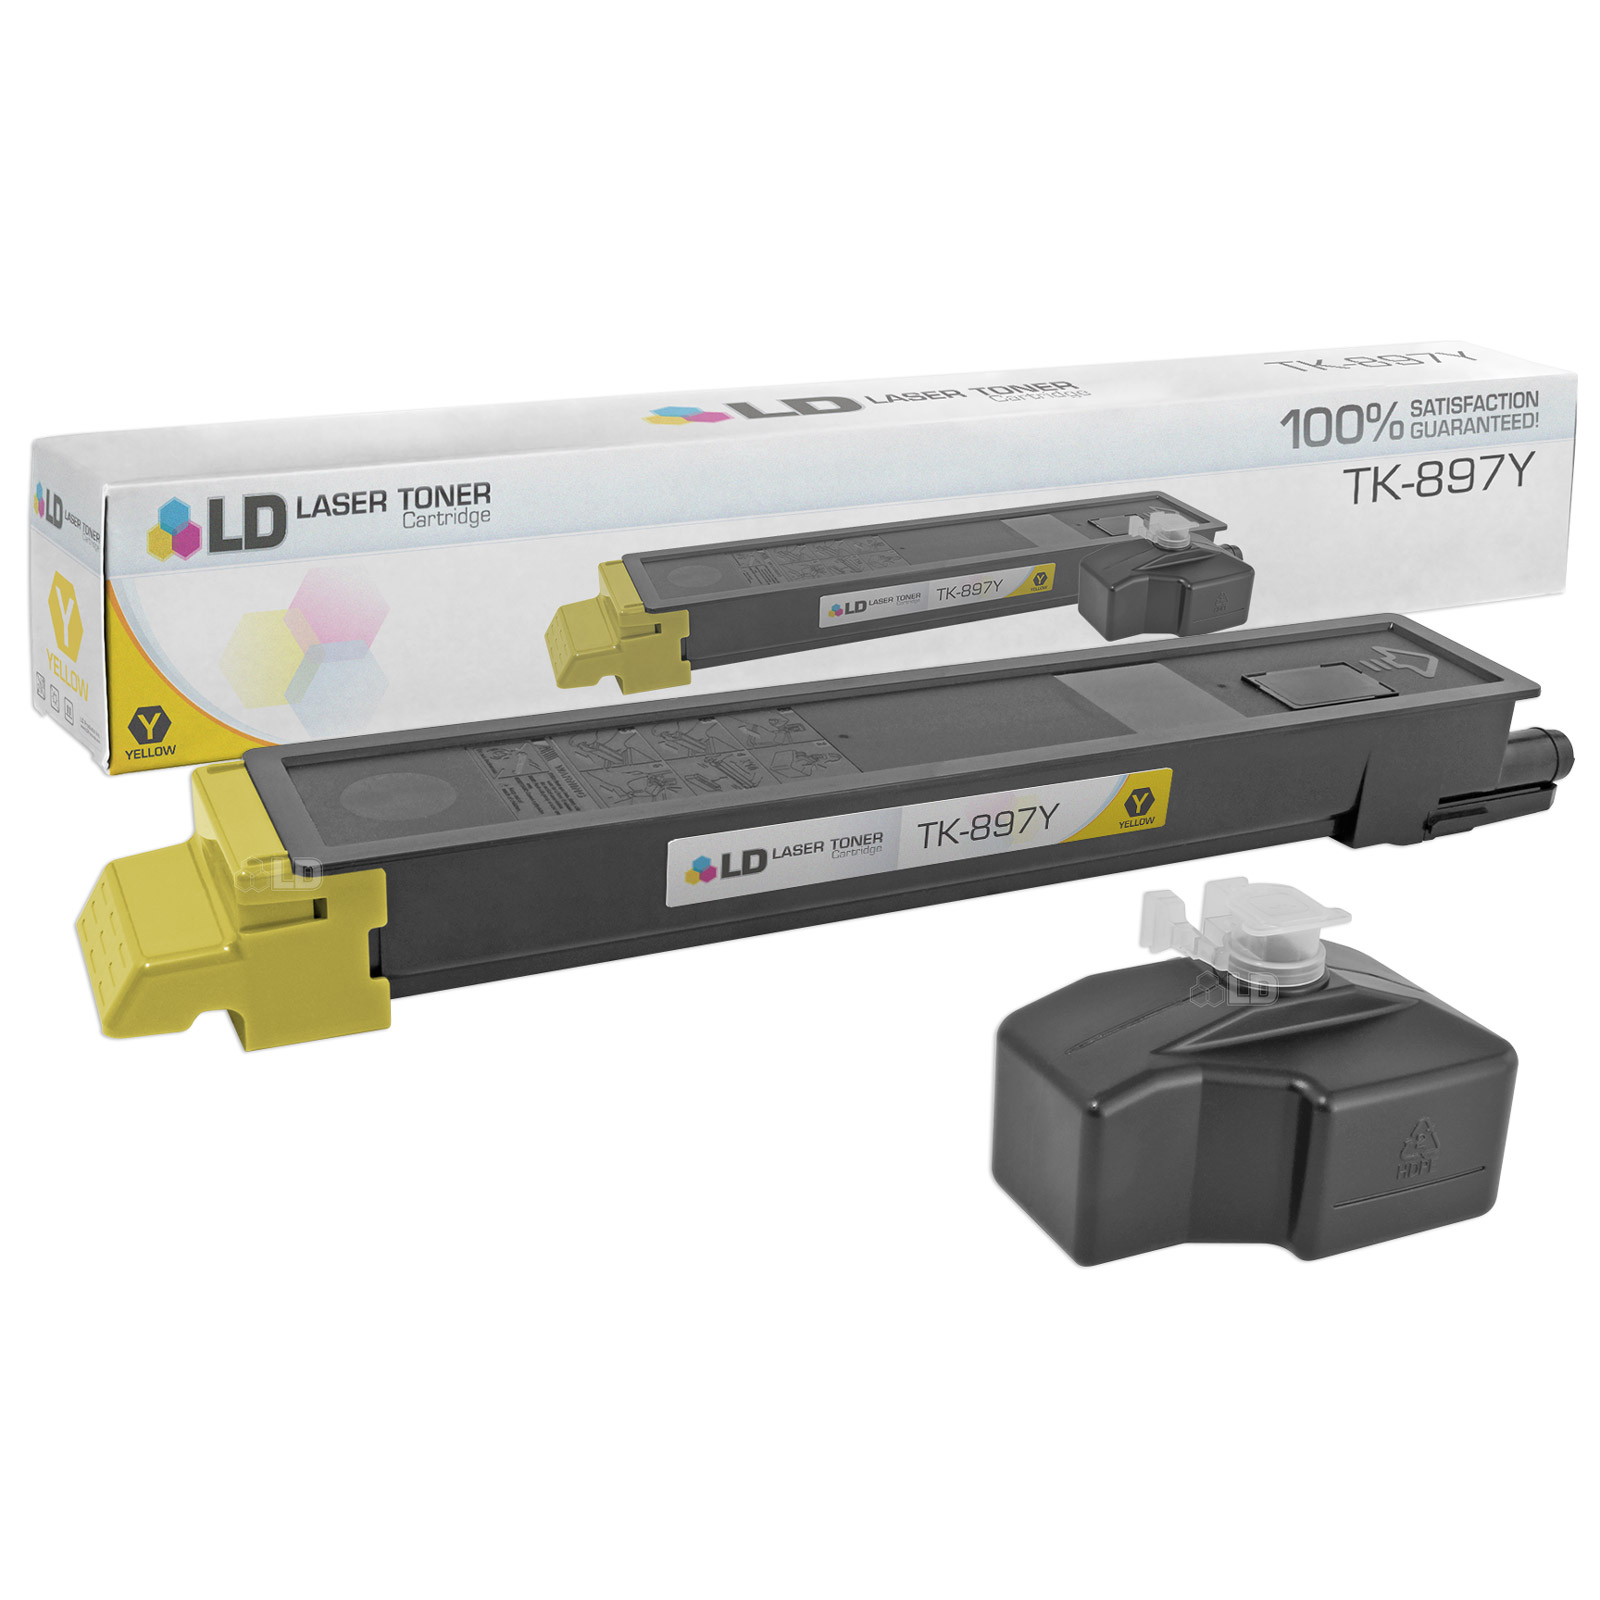 LD Compatible Replacement for Kyocera-Mita TK-897Y Yellow Laser Toner Cartridge for use in Kyocera-Mita TASKalfa 205c, 255, 255c, FS-C8520MFP, and FS-C8525MFP s - image 1 of 1